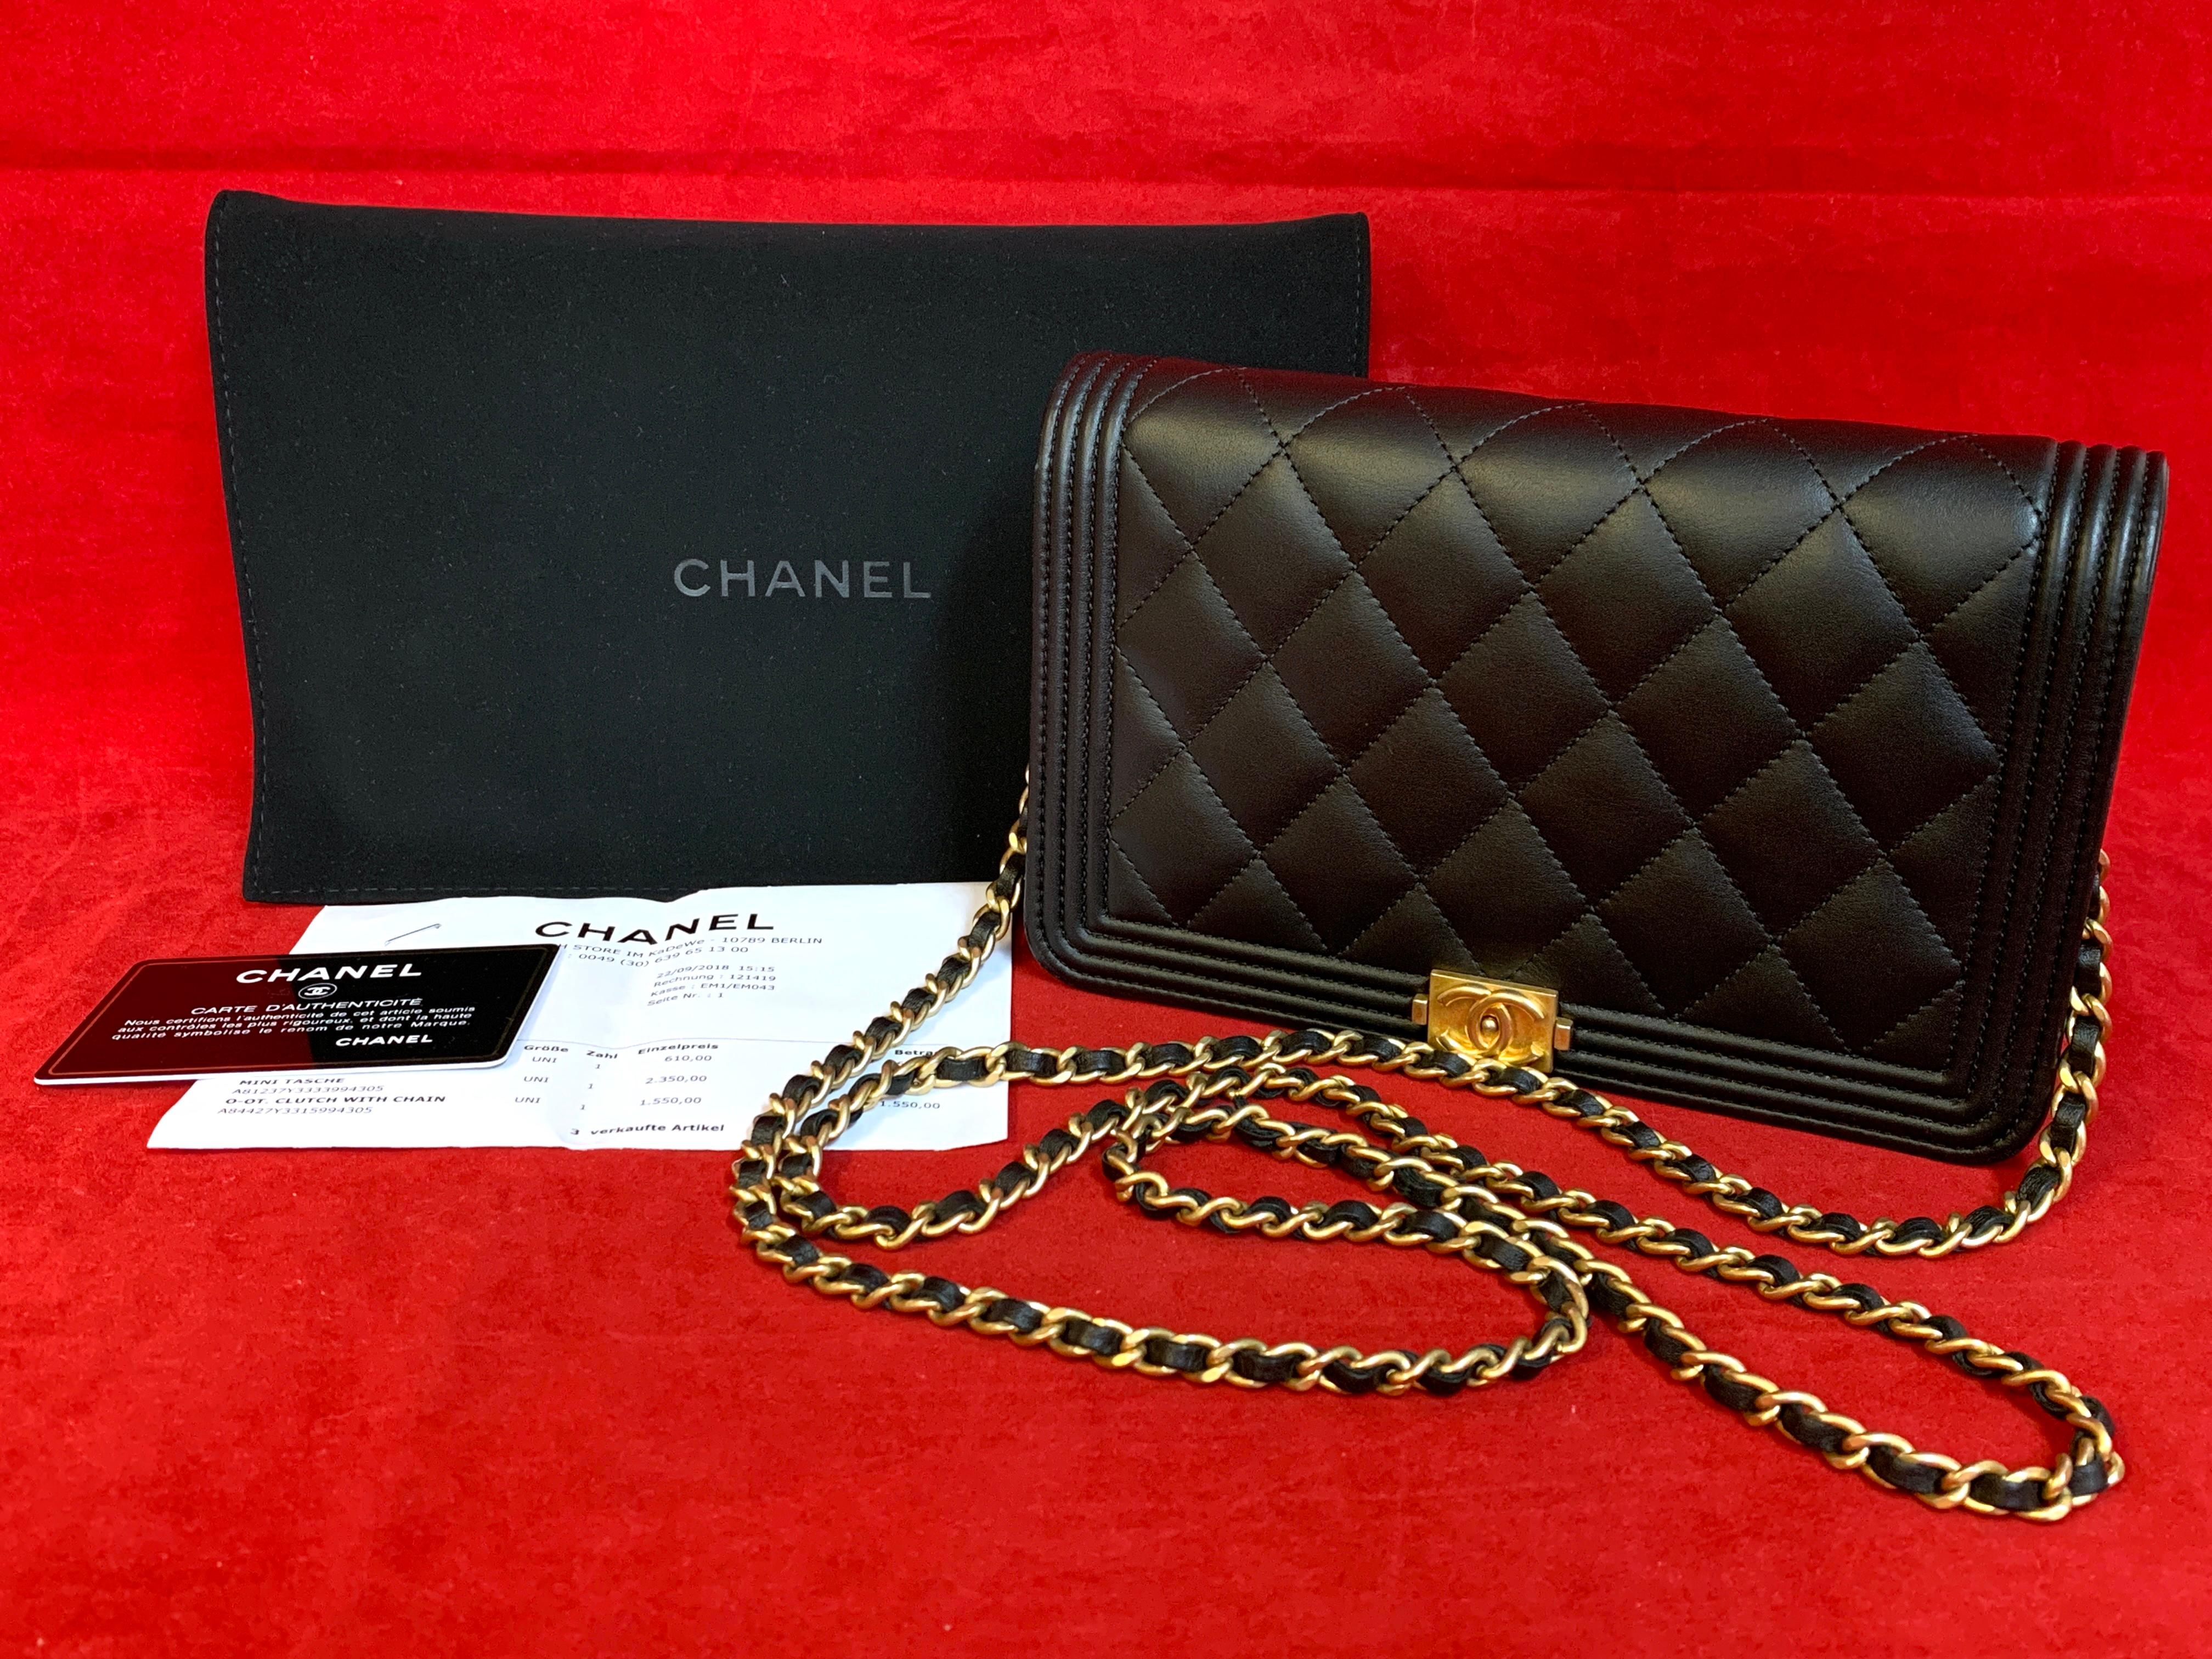 CHANEL Wallet on Chain made of black quilted lambskin.

The bag is in a very good condition and has minimal signs of use.

The delivery includes:
- Chanel Wallet on Chain
- Dustbag
- Original CHANEL bill of 2018
- warranty card

Dimensions:
12 x 19